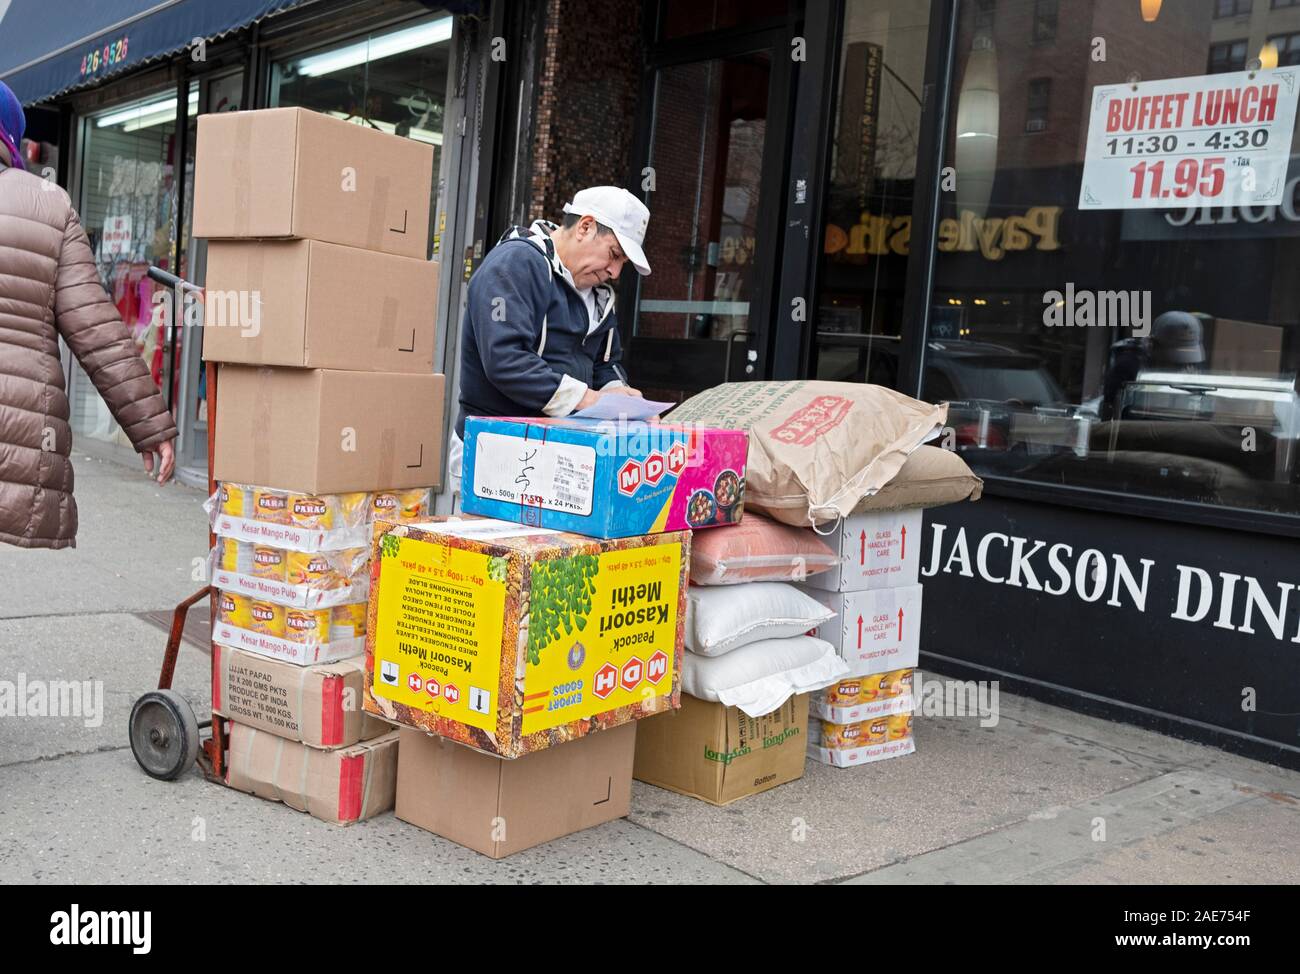 A delivery man, likely Hispanic, delivers food to the Jackson Diner Indian restaurant on 74th Street in Jackson Heights, Queens, New York City. Stock Photo